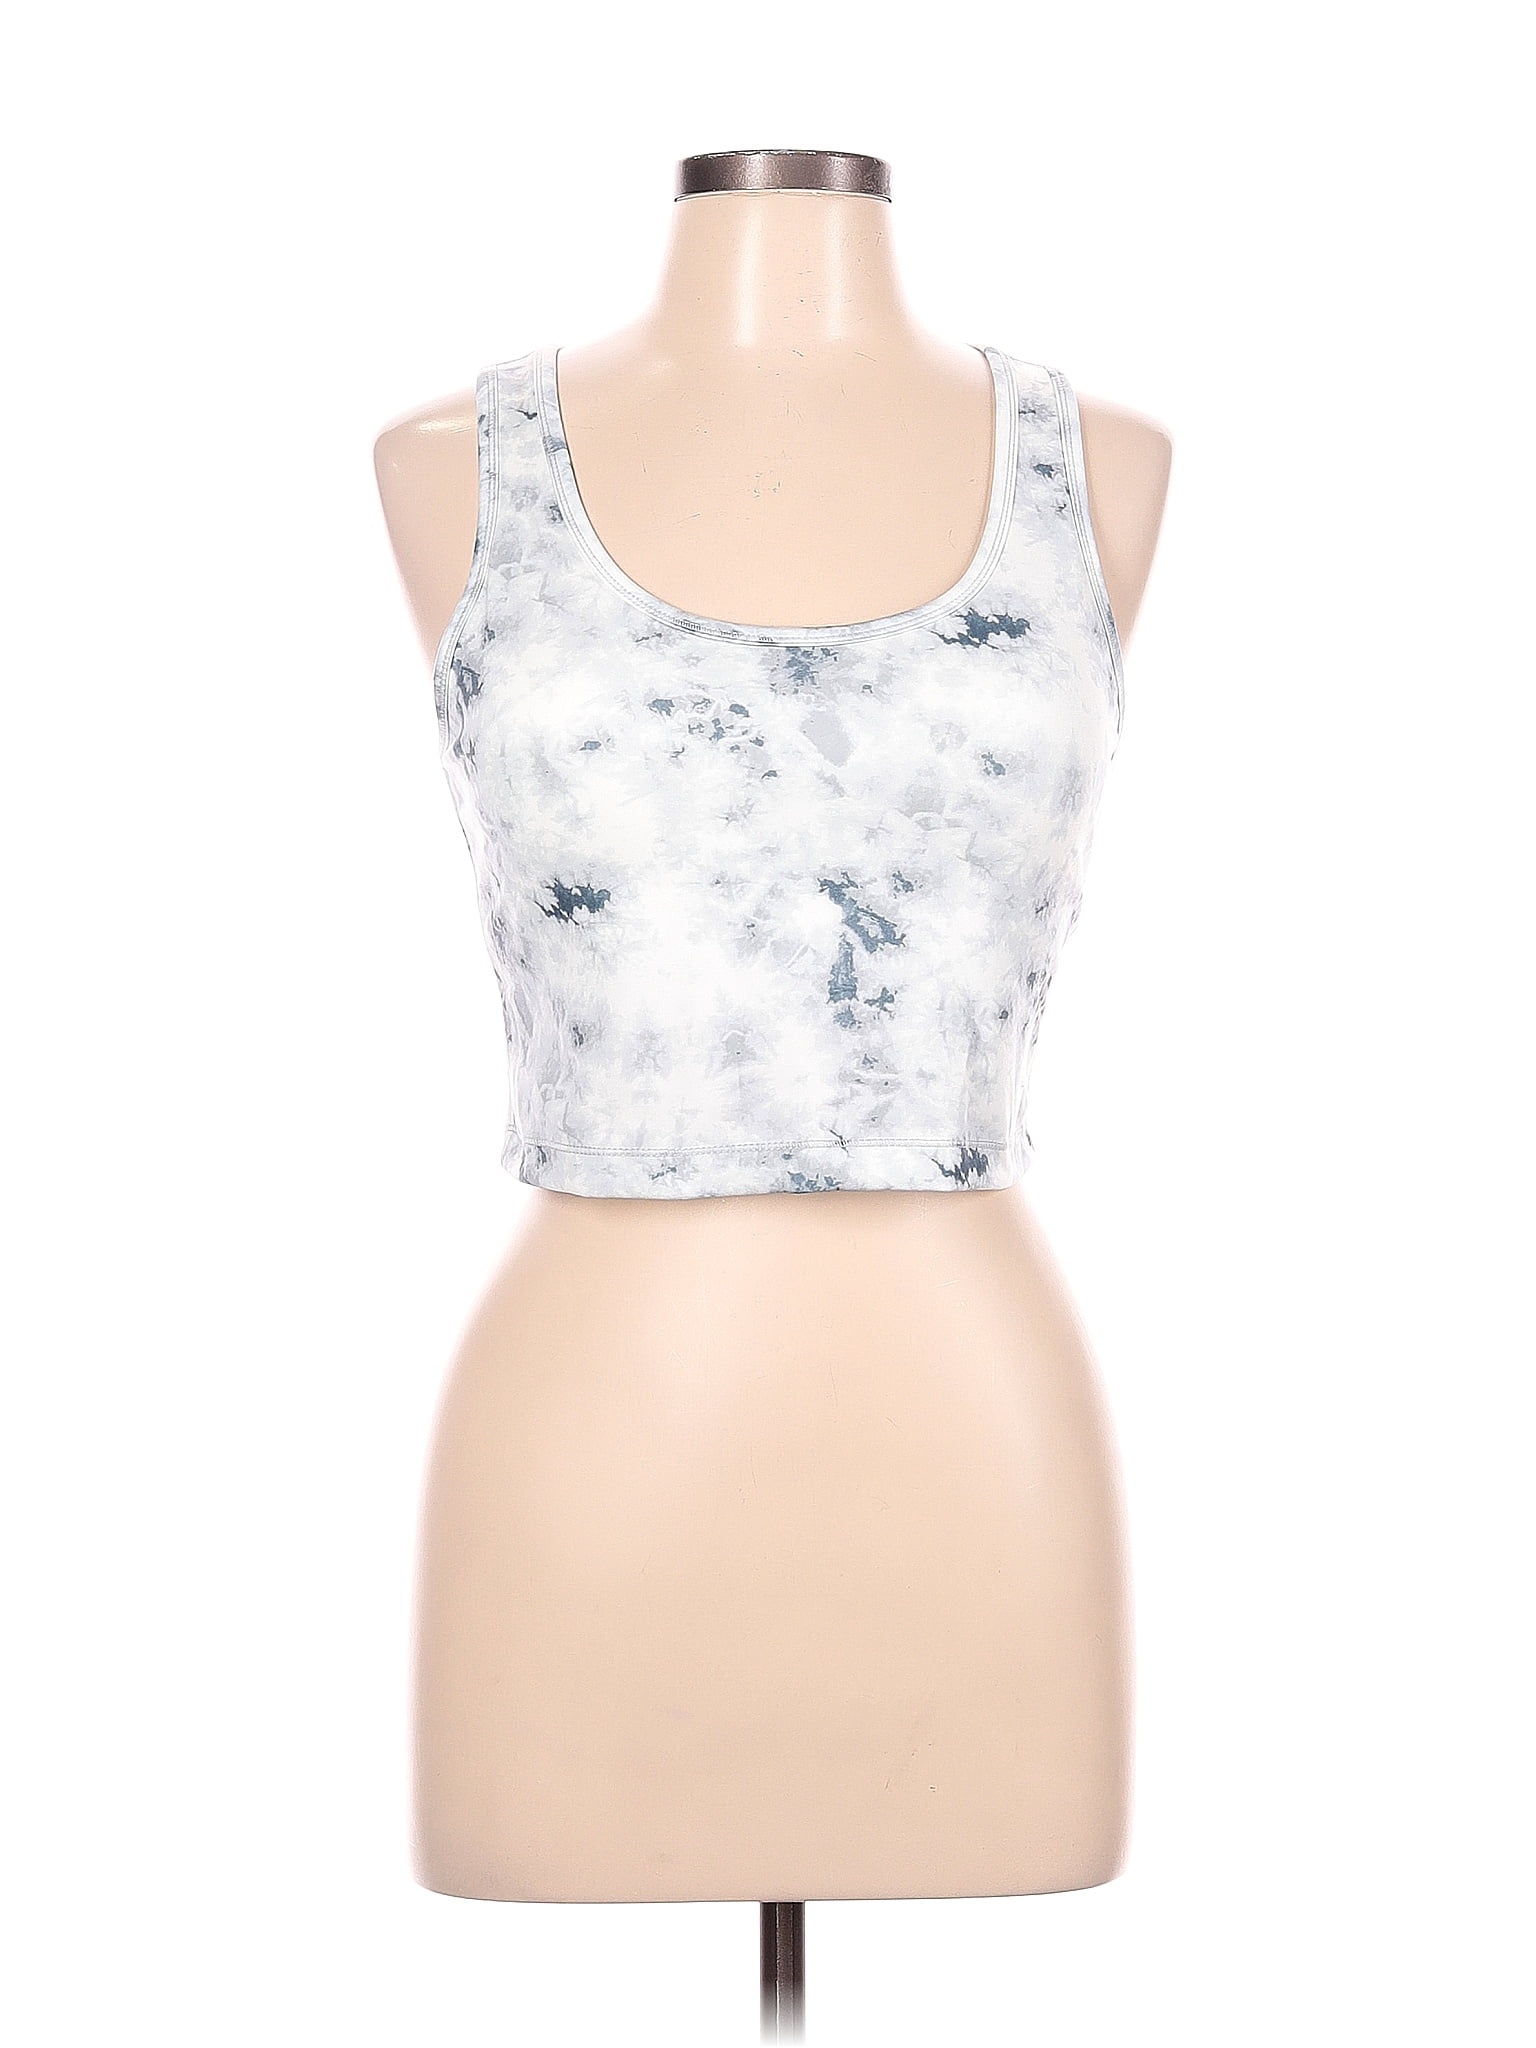 Yogalicious Women's Short Sleeve Cropped Top 